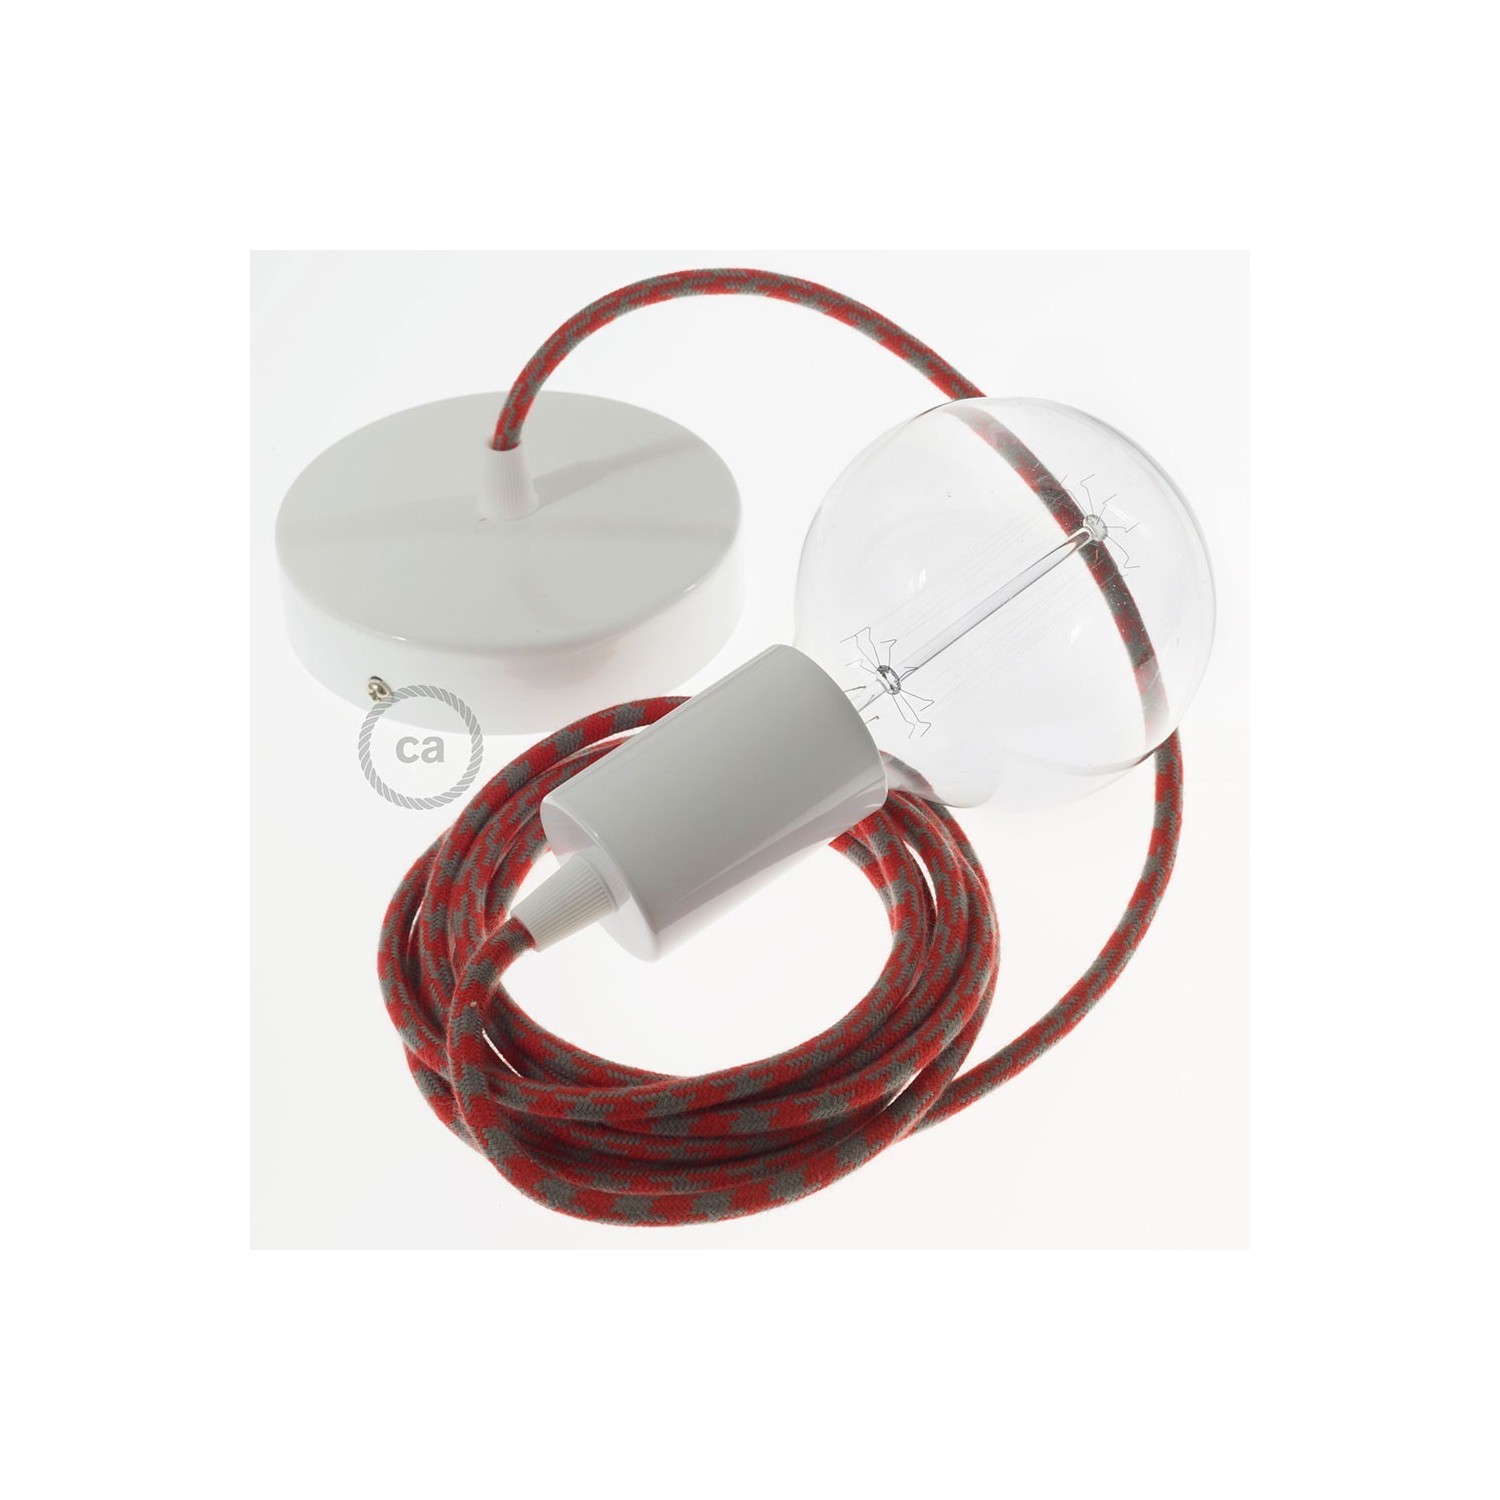 Single Pendant, suspended lamp with Bicolored Fire Red and Grey Cotton textile cable RP28